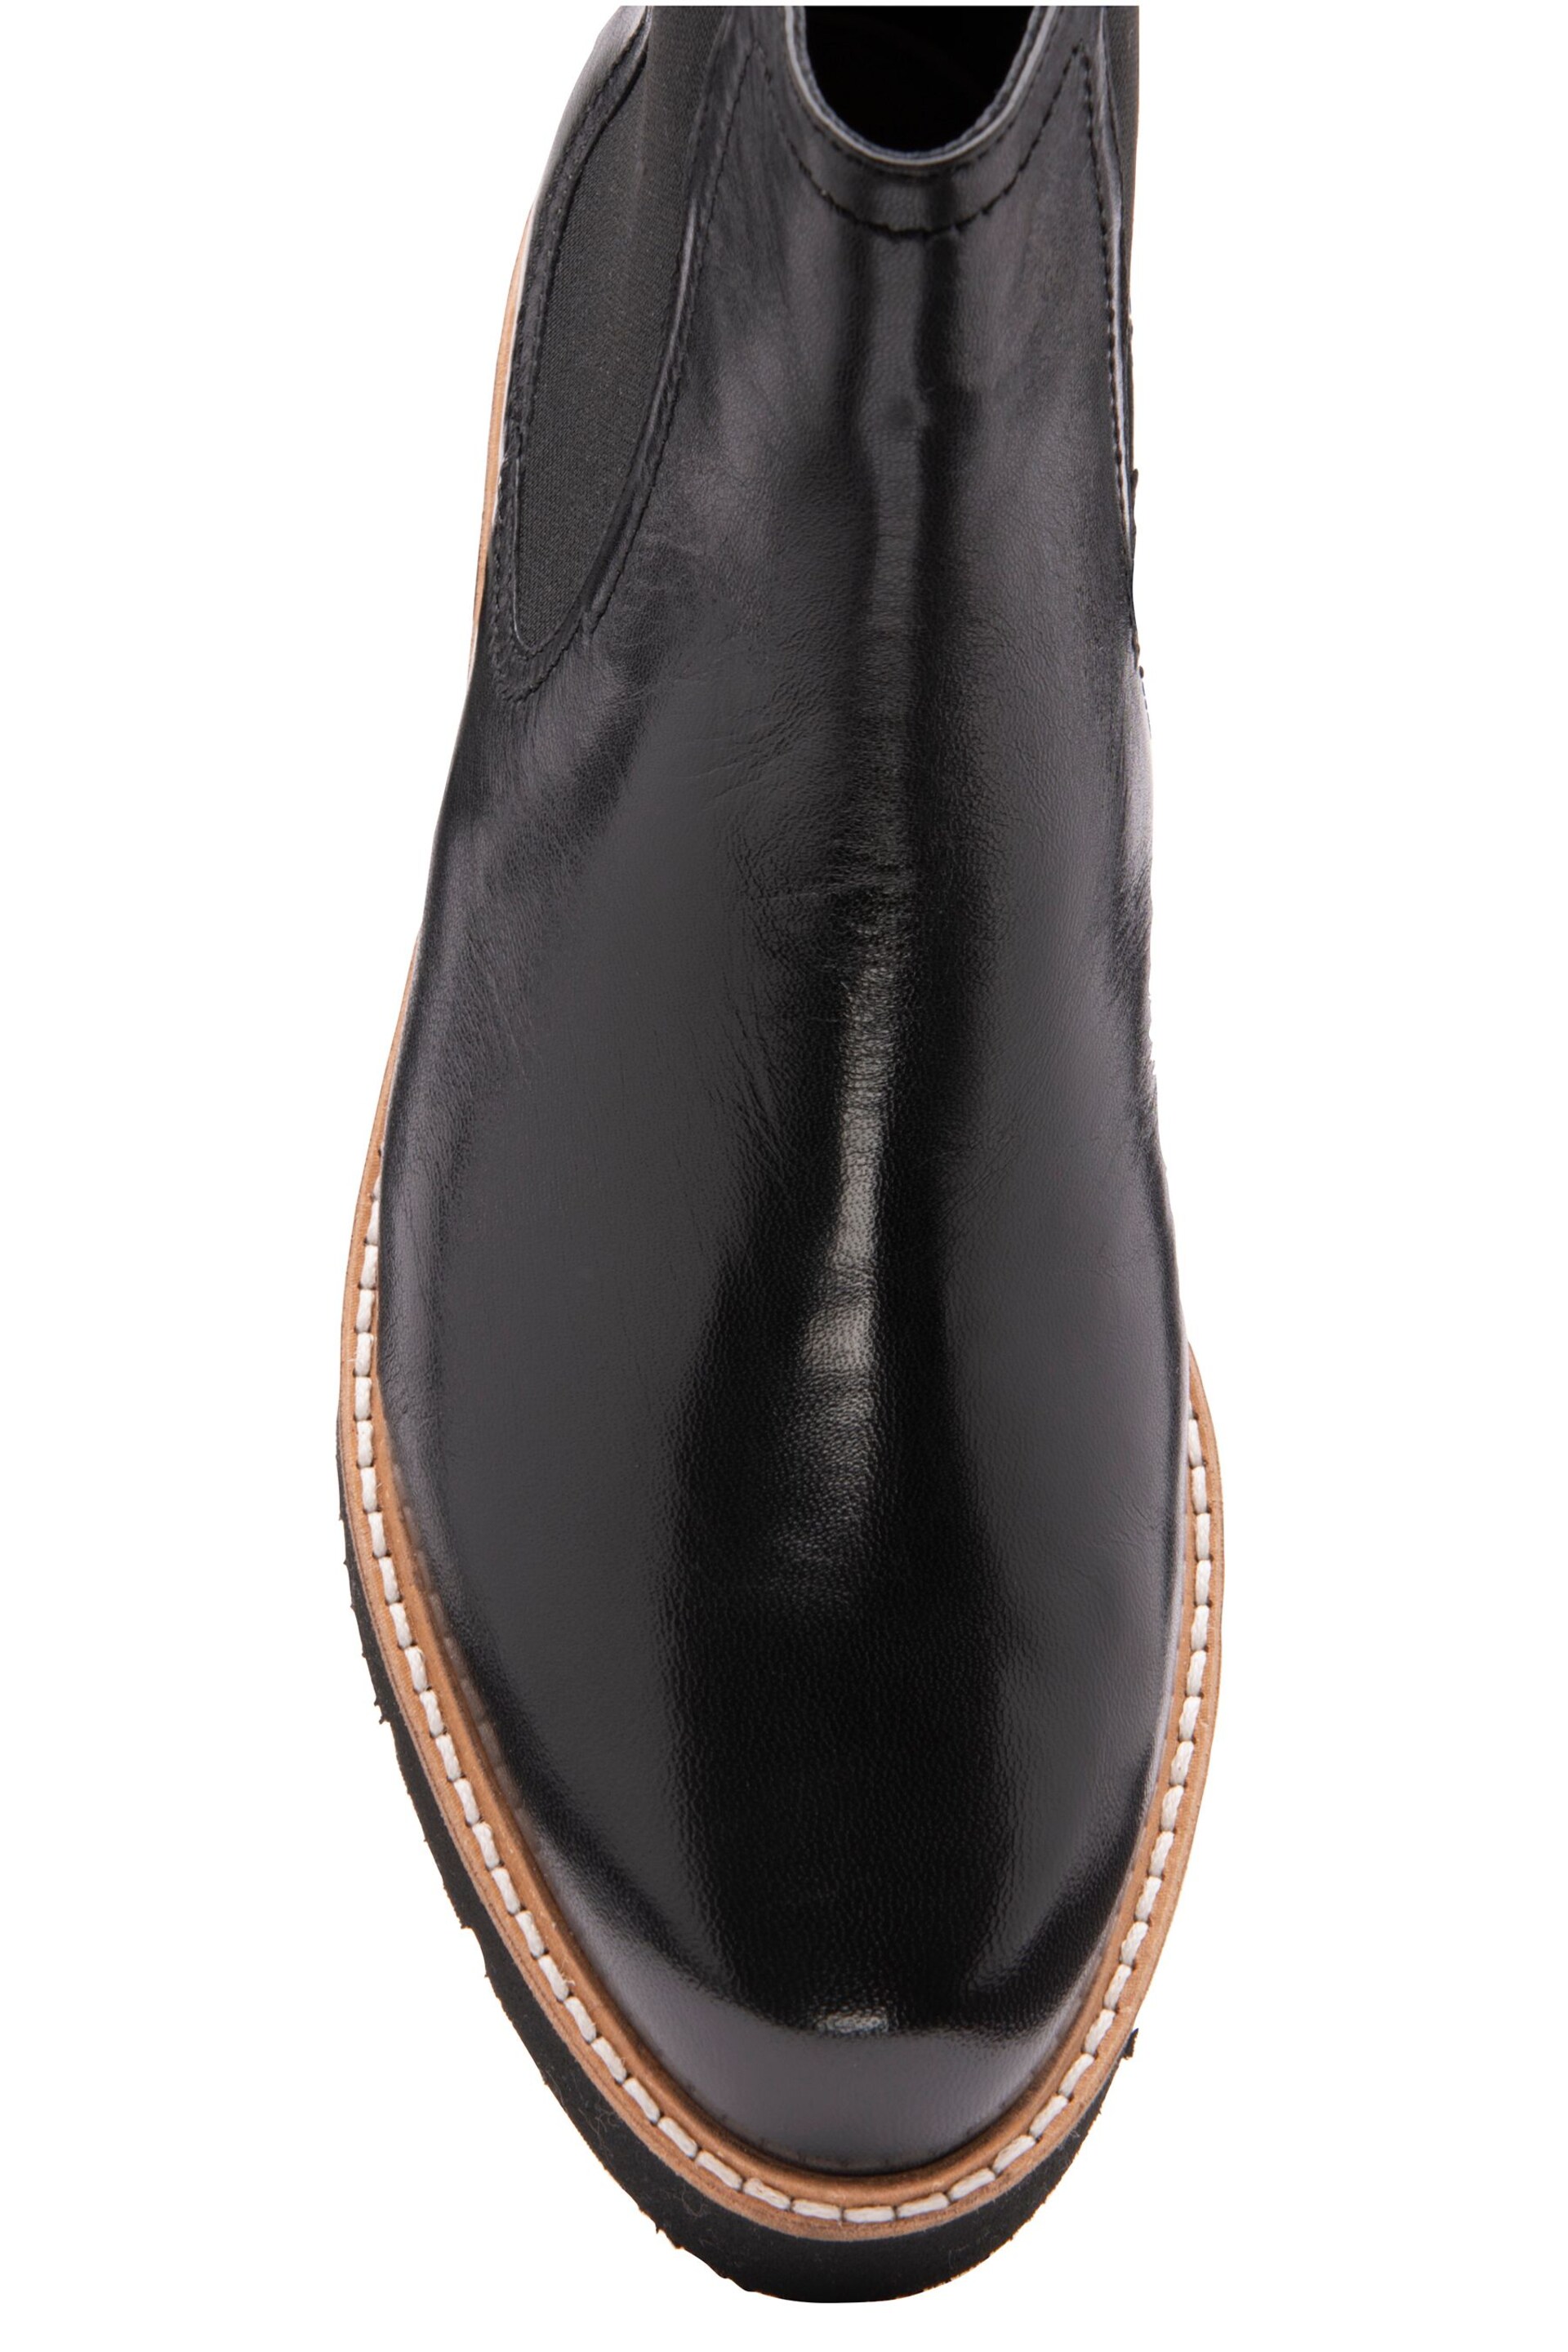 Ravel Black Leather Ankle Boots - Image 4 of 4